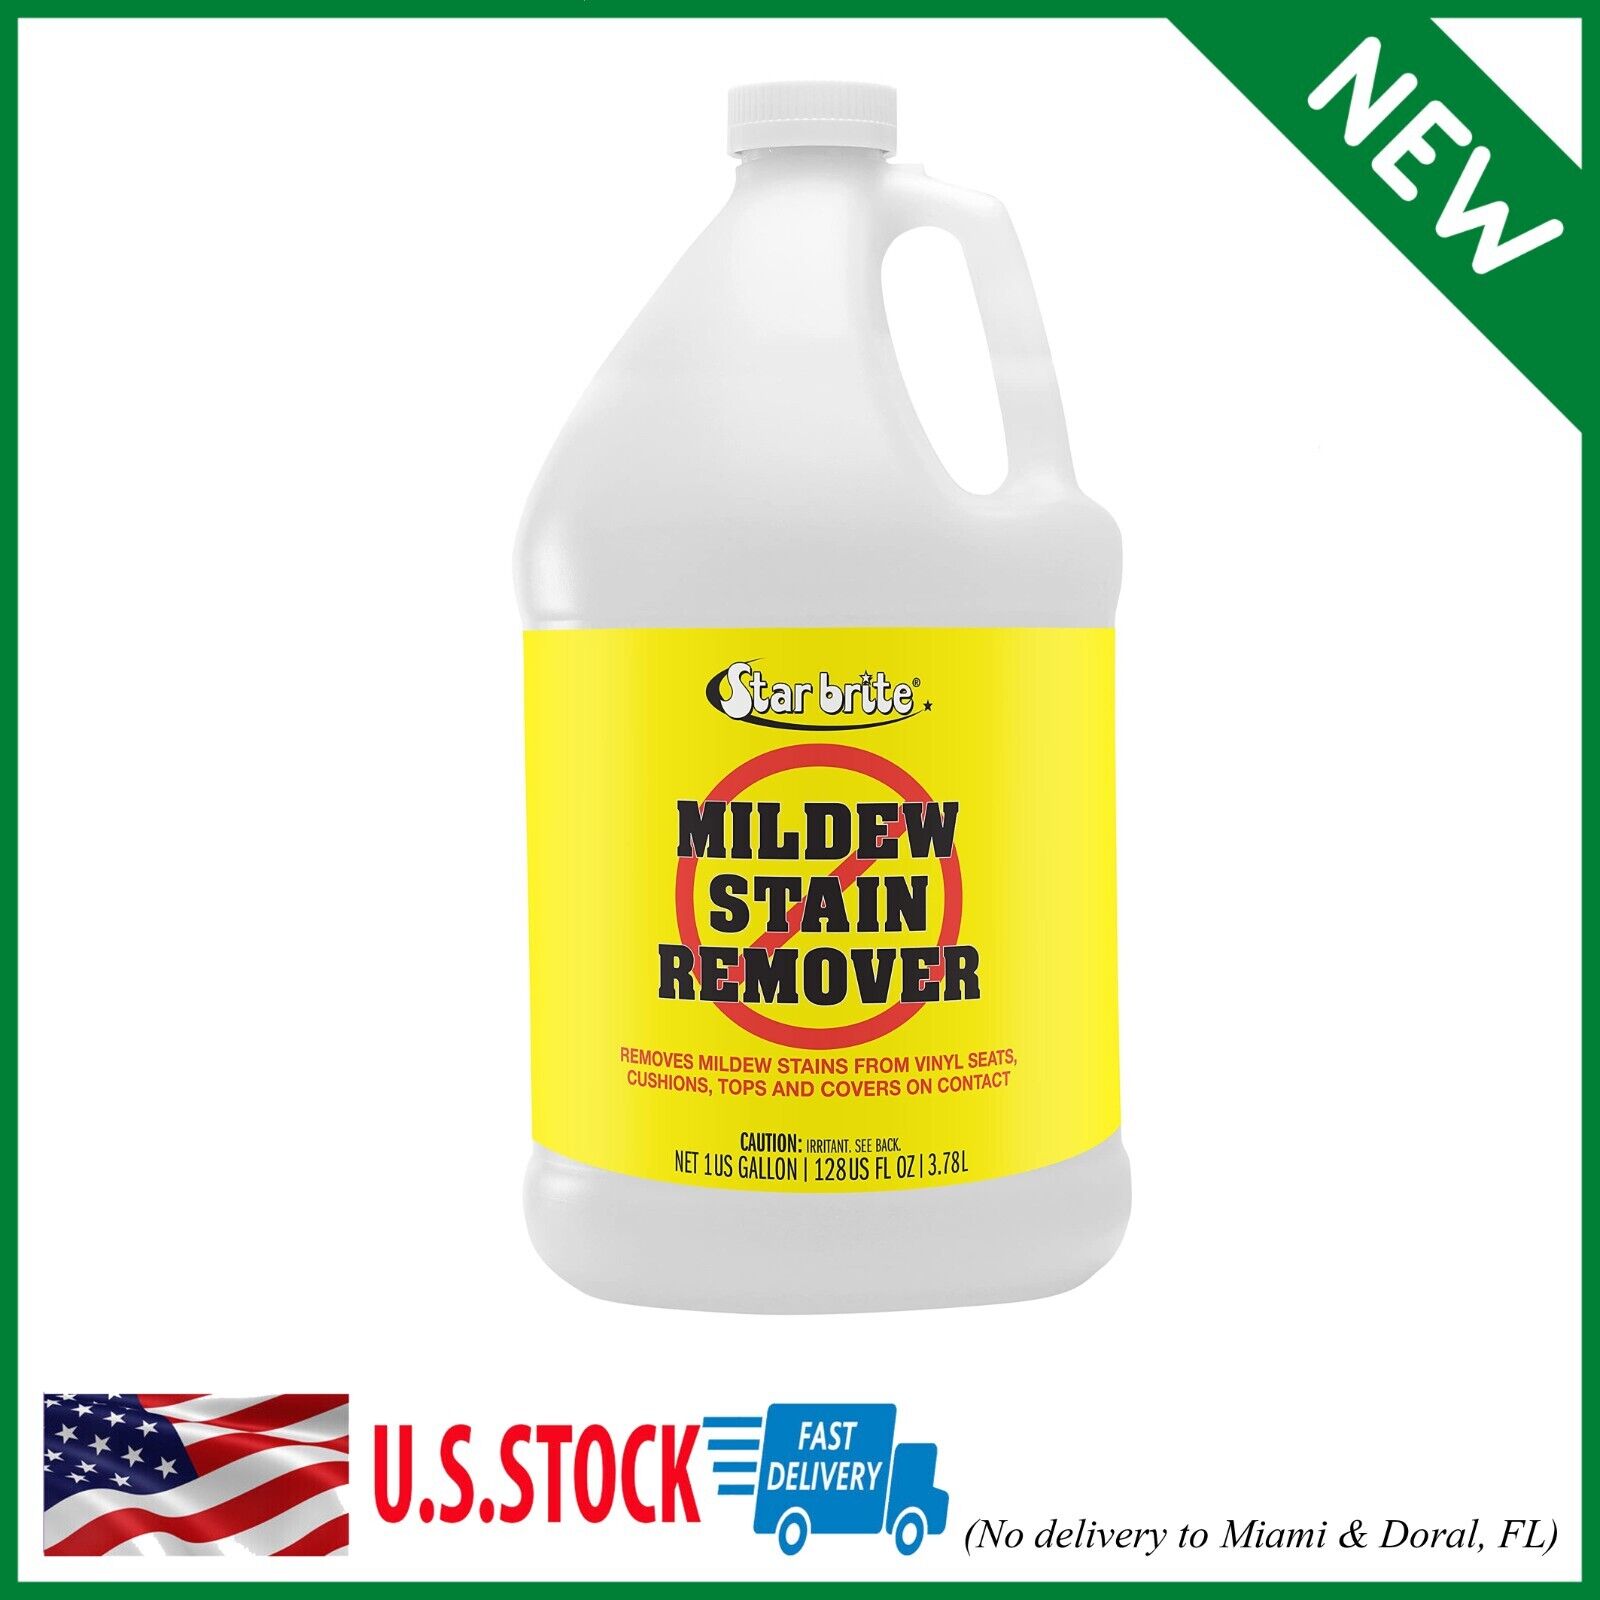 STAR BRITE Mold & Mildew Stain Remover + Cleaner – Removes Stains on Contact - 1